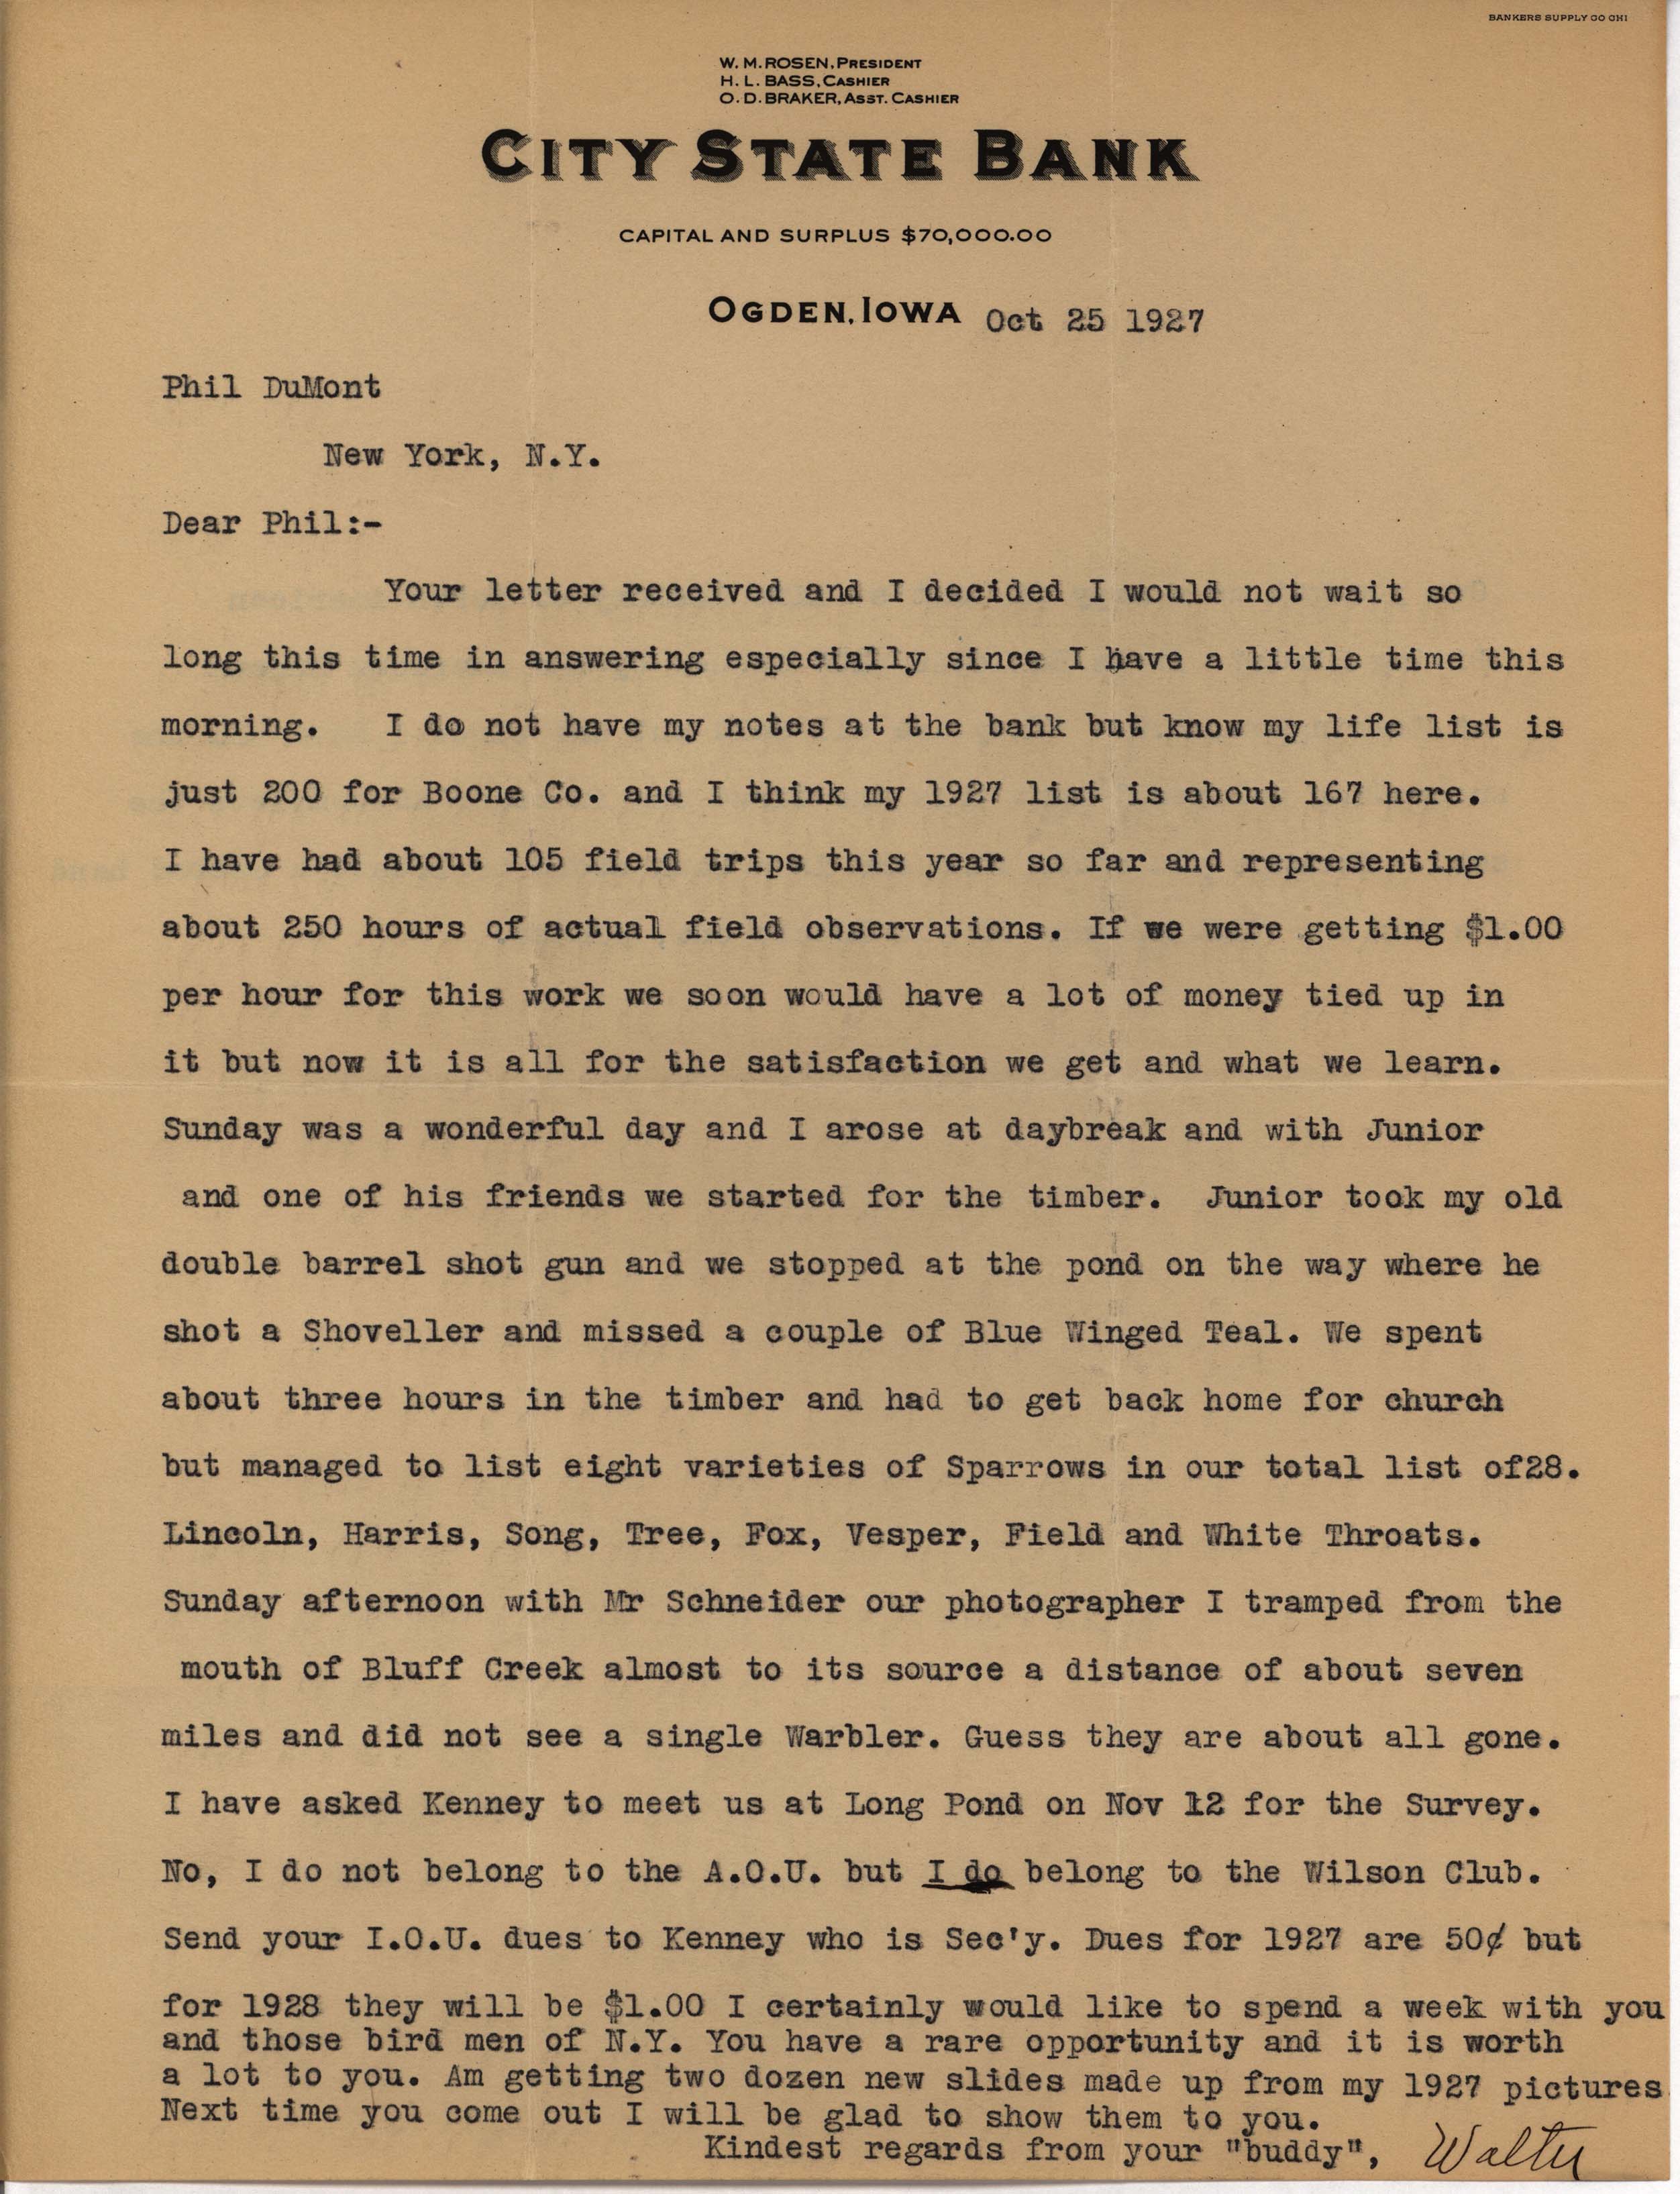 Walter Rosene letter to Philip DuMont regarding a recent outing and society memberships, October 27, 1927